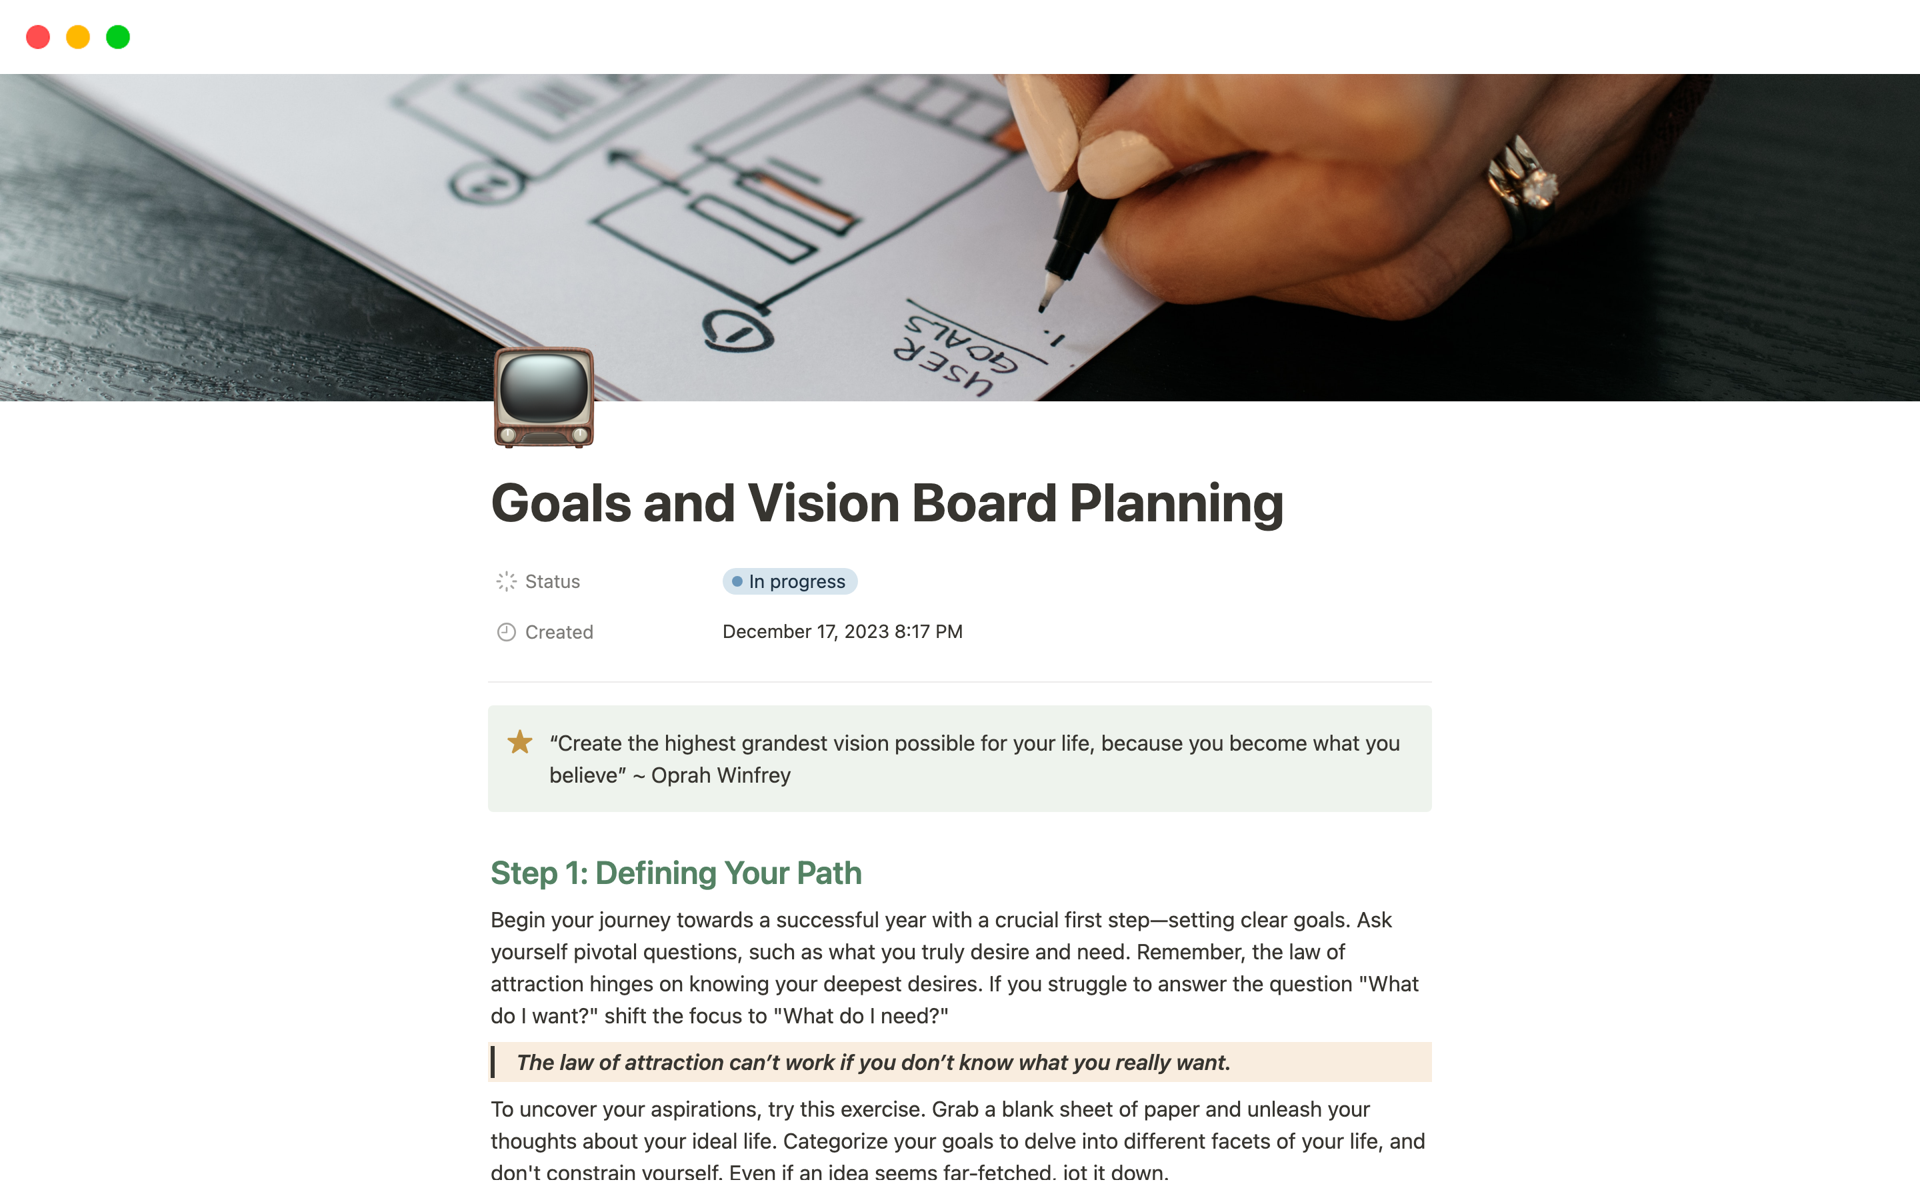 This template will help you go through and exercise to plan your goals and vision board for 2024! 